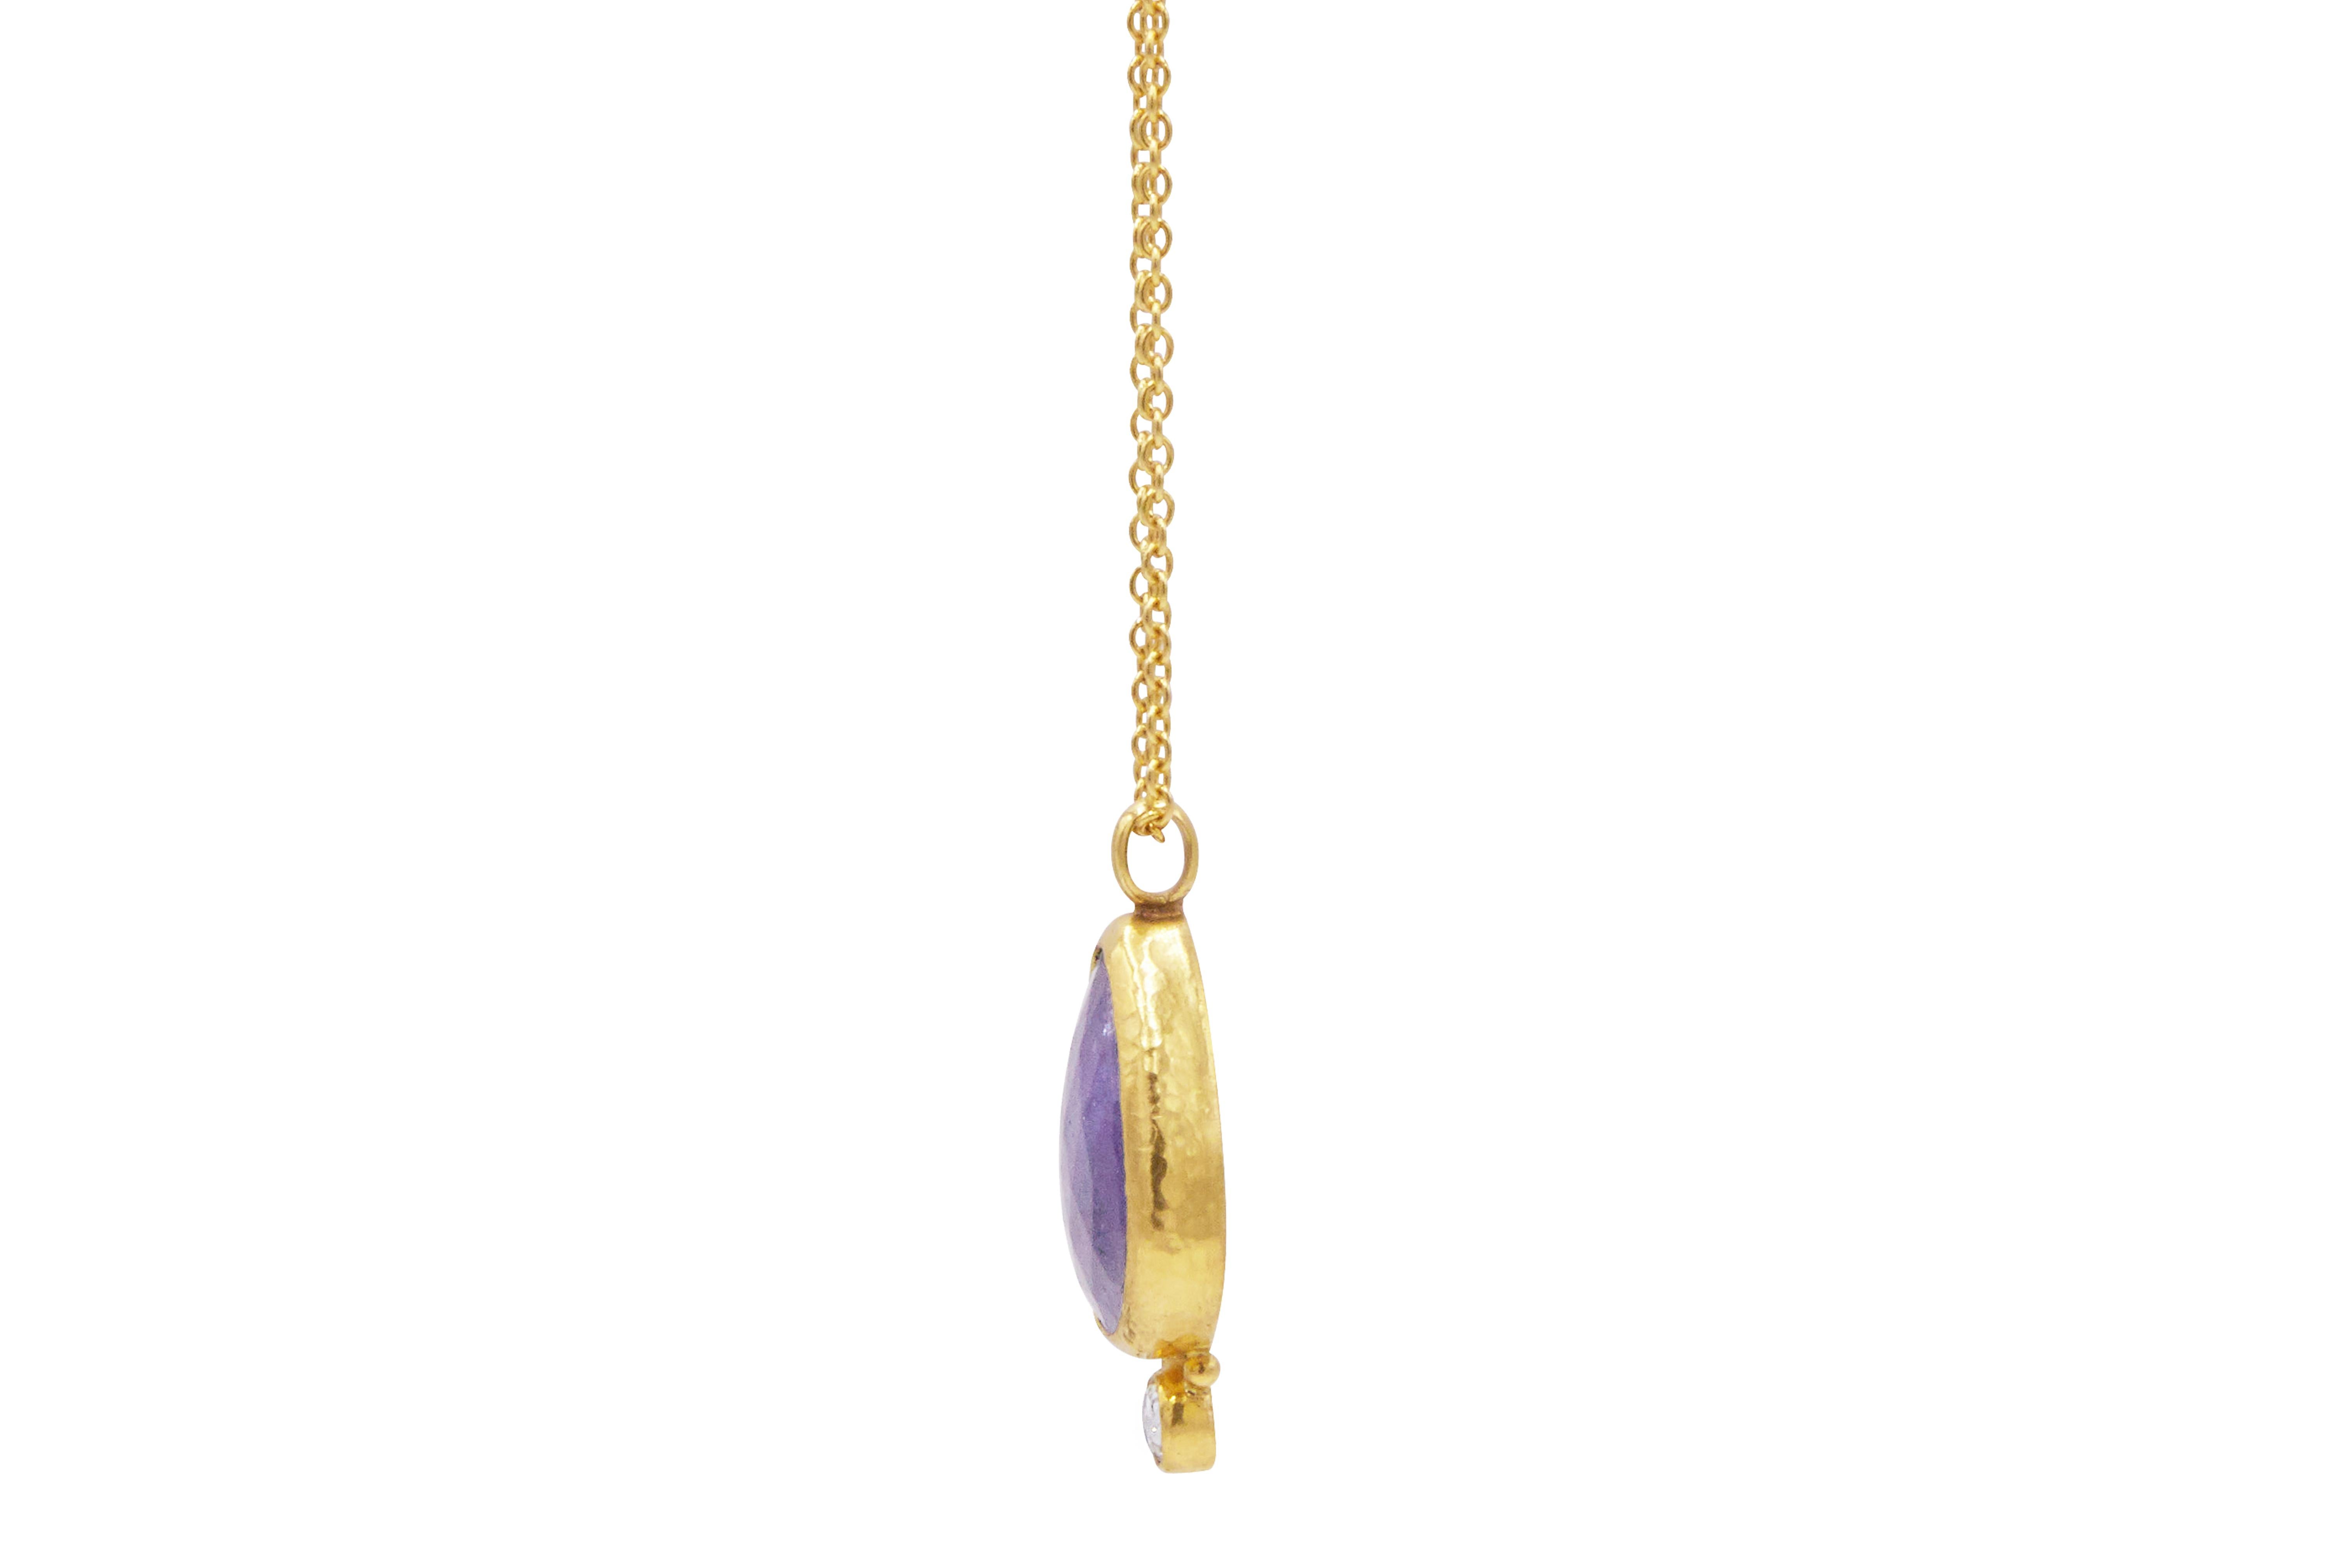 Contemporary GURHAN 24 Karat Hammered Yellow Gold and Tanzanite Diamond Pendant Necklace For Sale